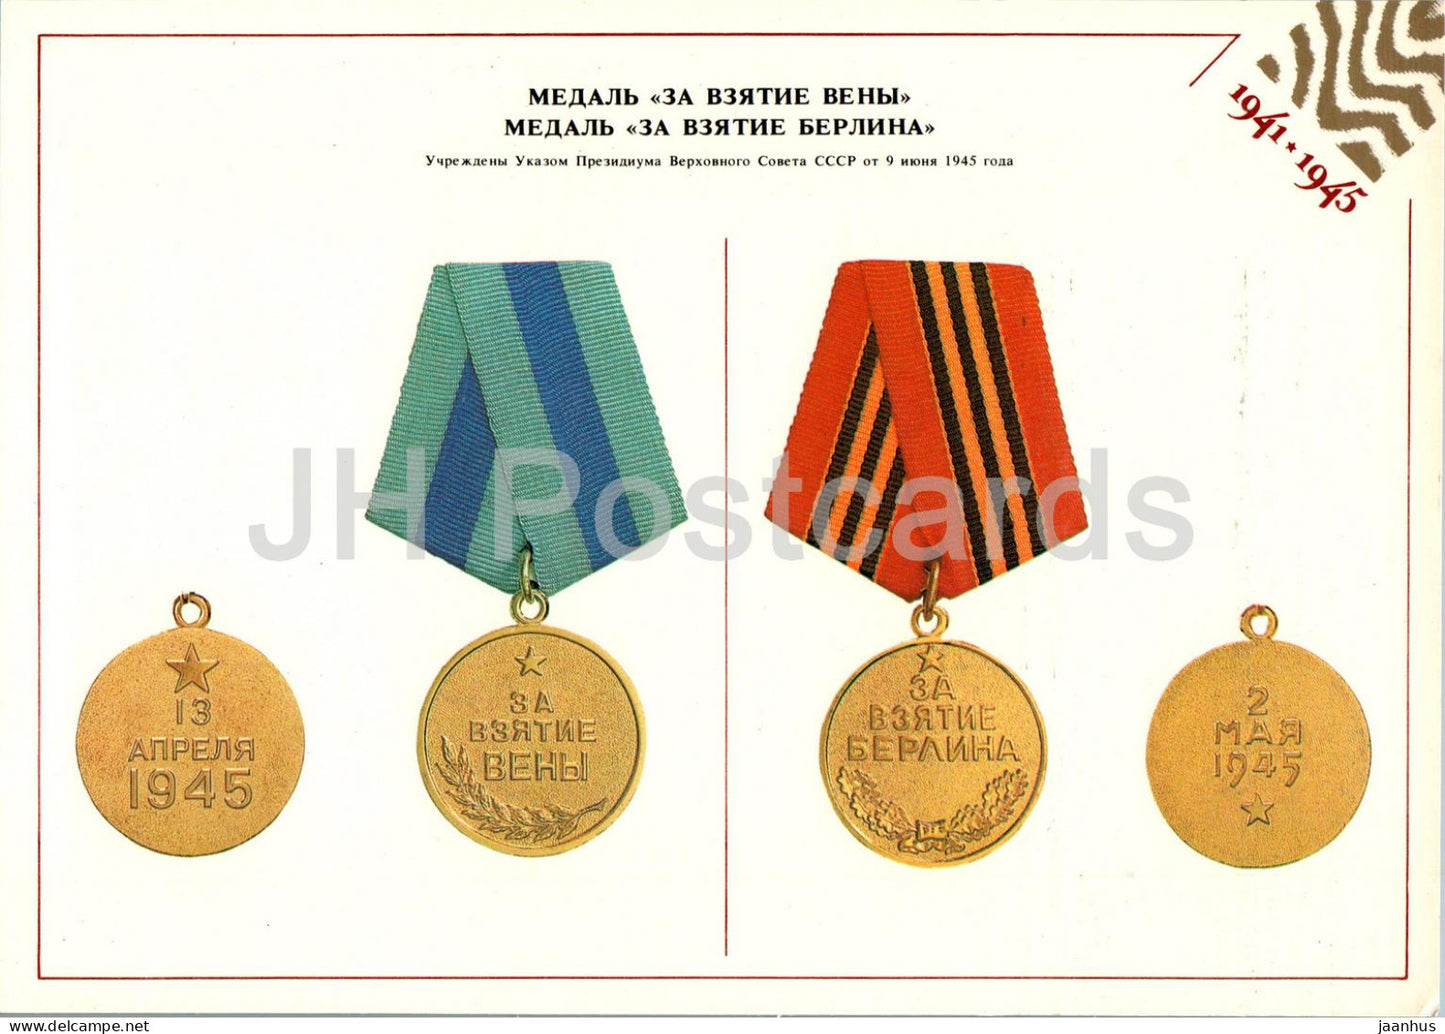 Medal for the capture of Vienna - Orders and Medals of the USSR - Large Format Card - 1985 - Russia USSR - unused - JH Postcards